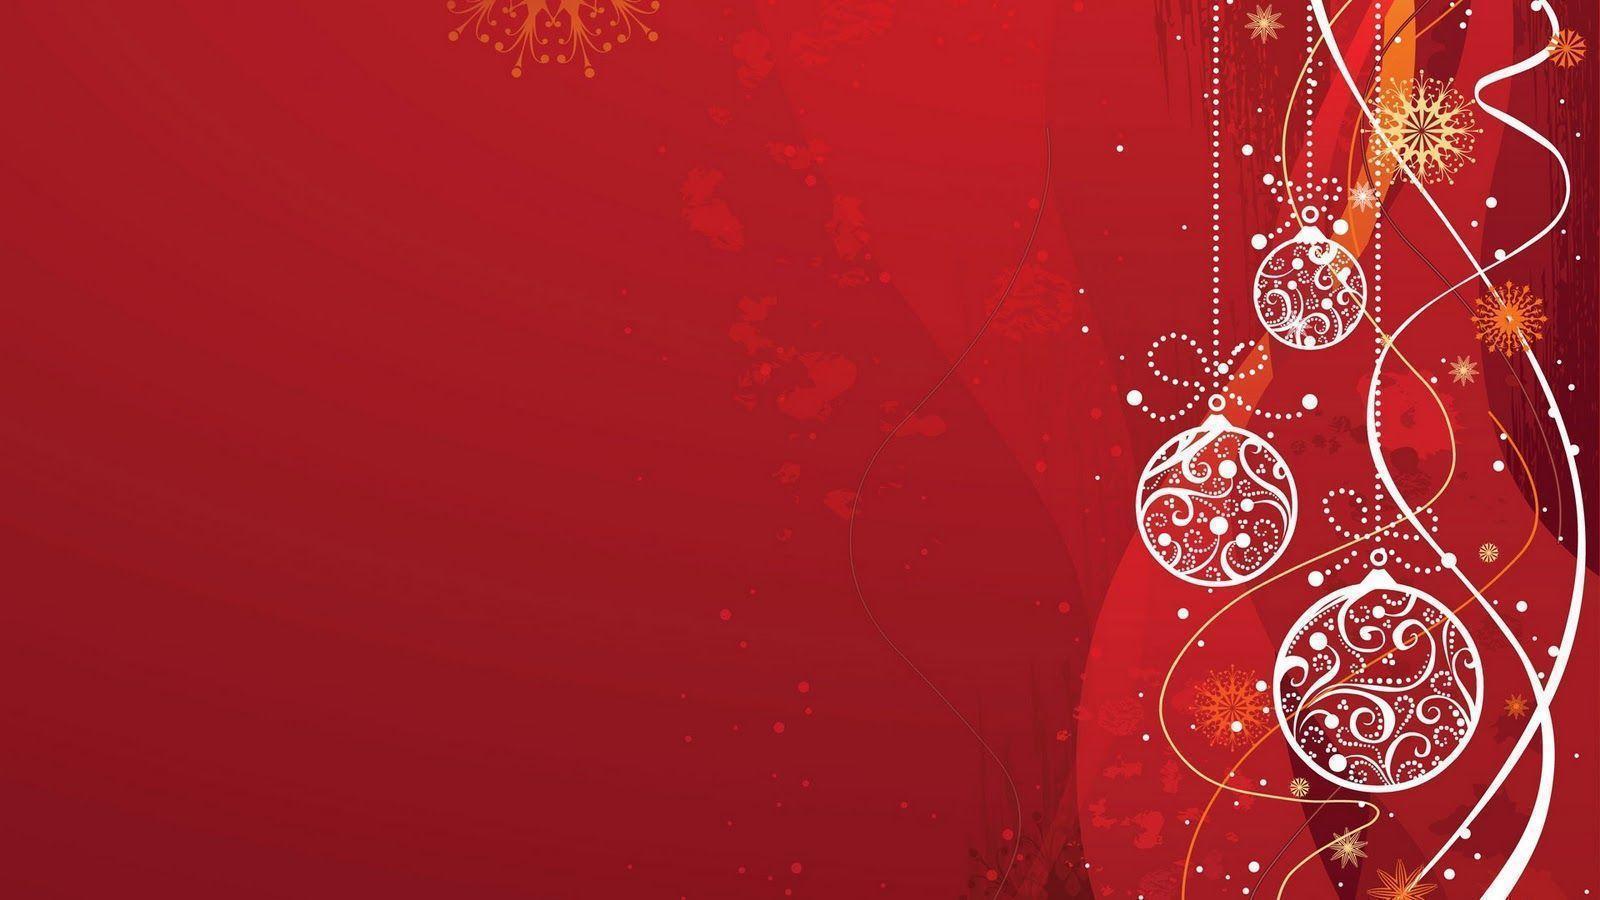 Red Christmas Wallpaper Background Wallpaper. AWS HD